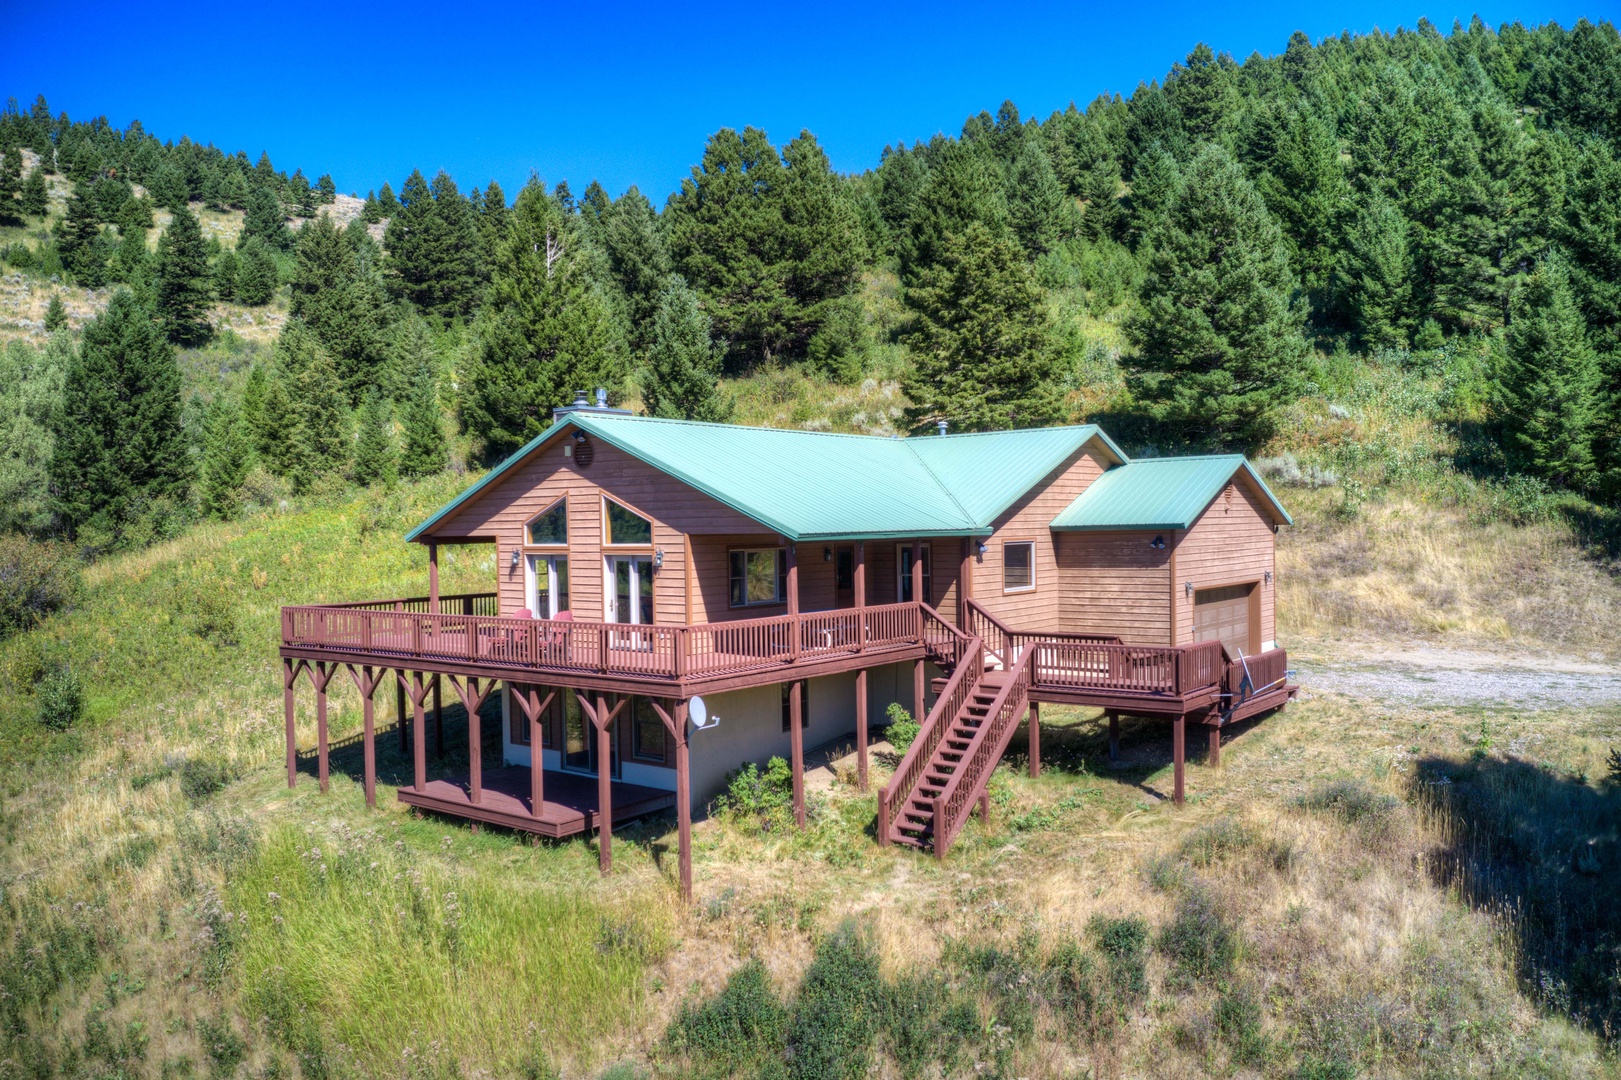 Bozeman Vacation Rentals, The Canyon Lookout - Private and Spacious Nature Sanctuary